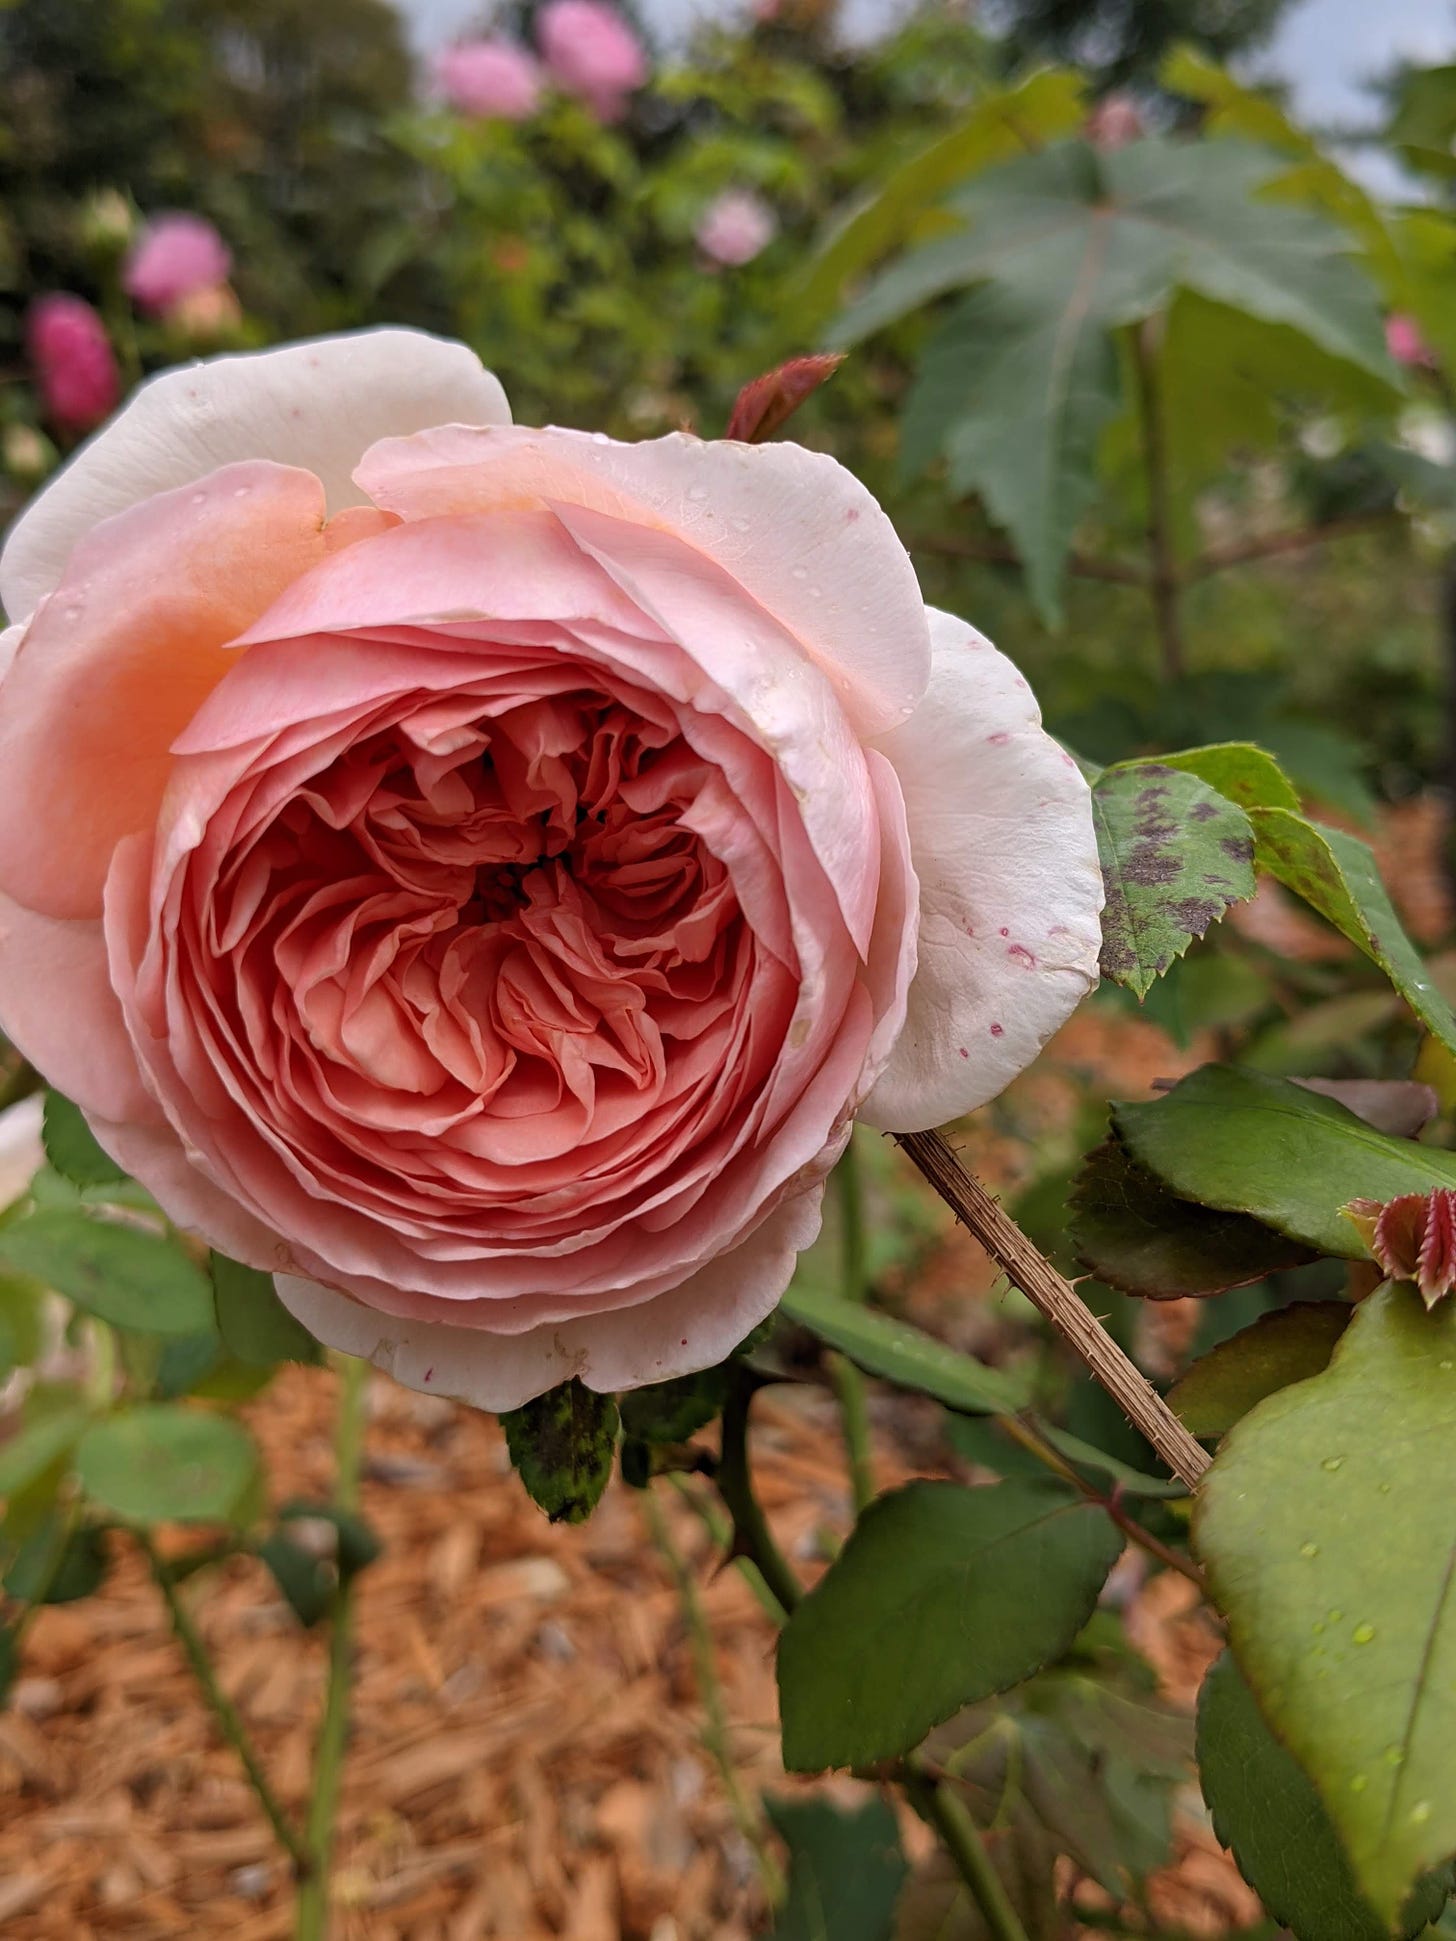 A large, single, coral-pink 'old-fashioned' rose.